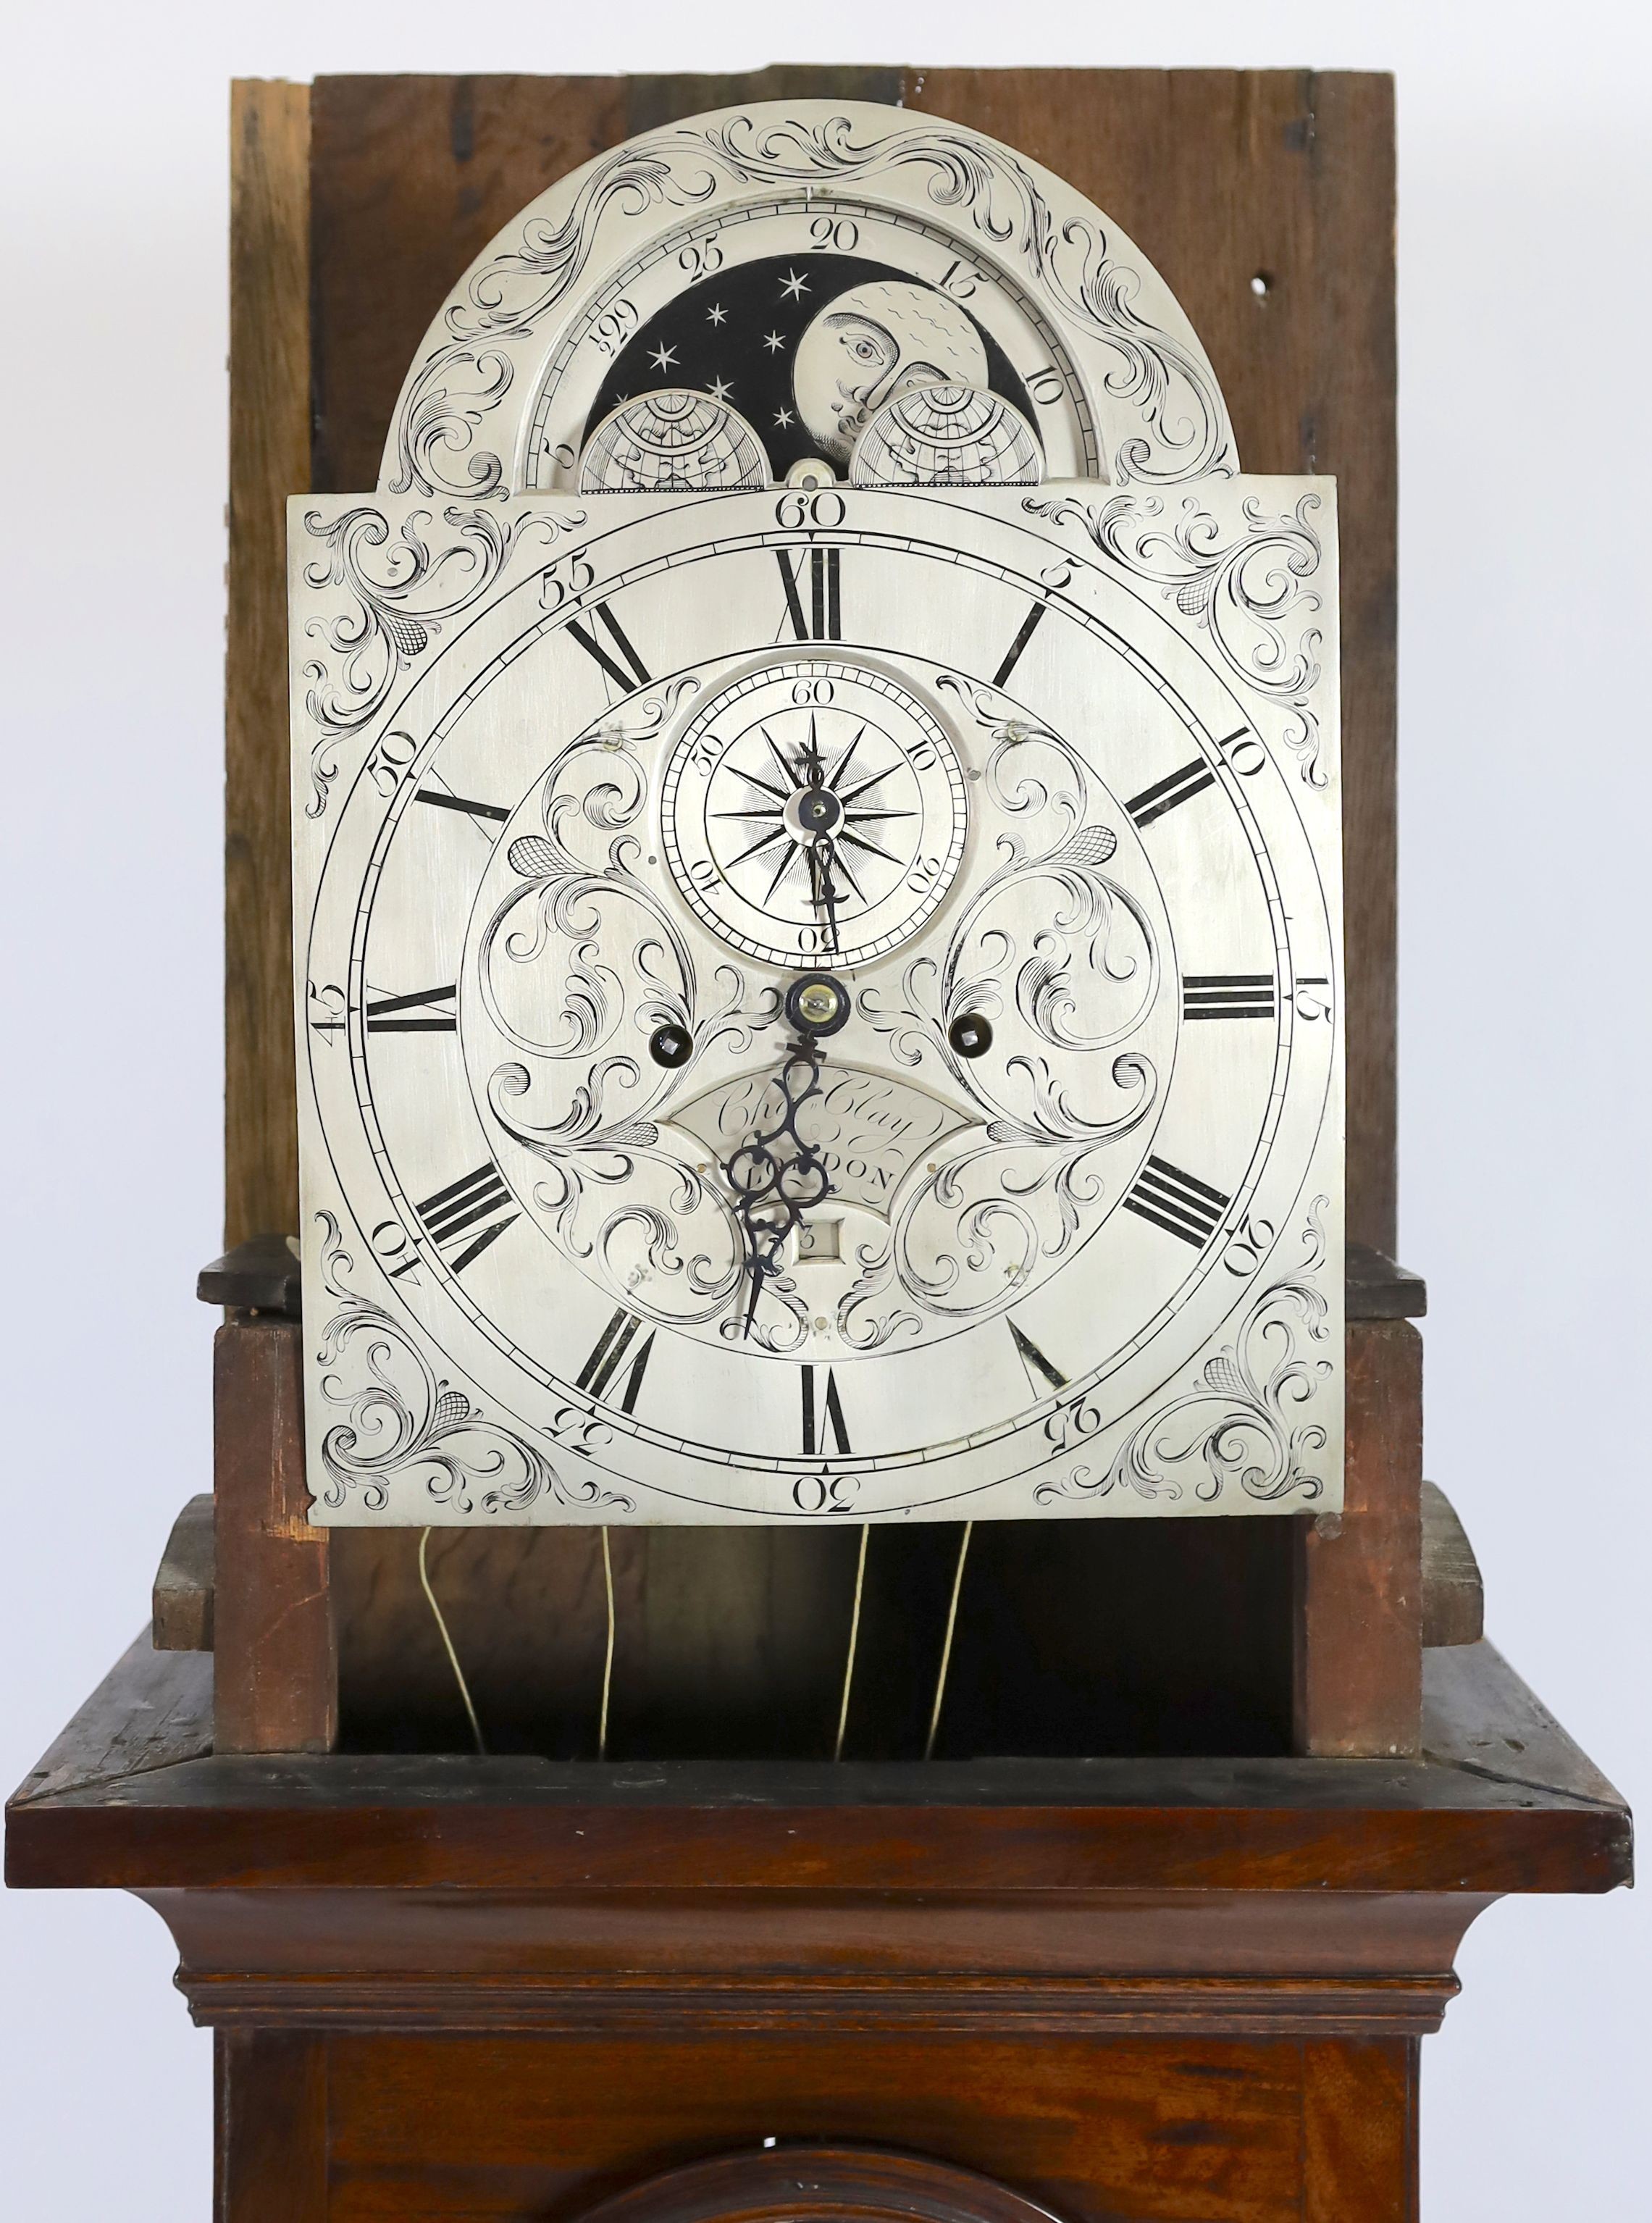 A George III mahogany cased eight day longcase clock, by Charles Clay, London, the 30cm arched silvered dial with moonphase, subsidiary seconds and calendar aperture, height 224cm